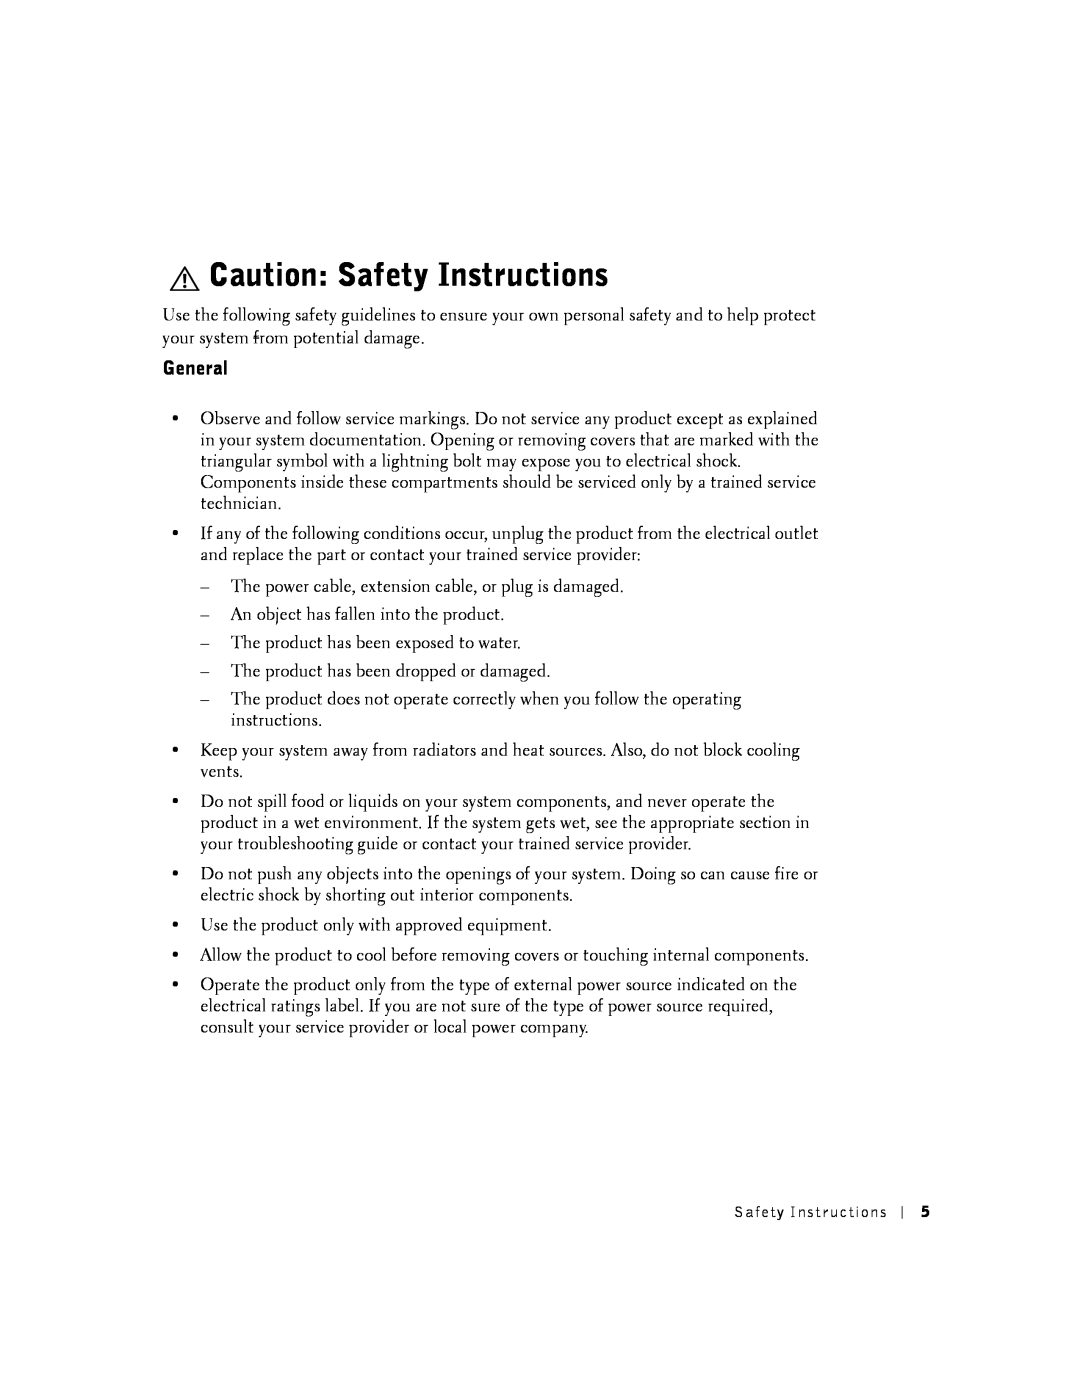 Dell 2016, 2024 manual Caution Safety Instructions, General 